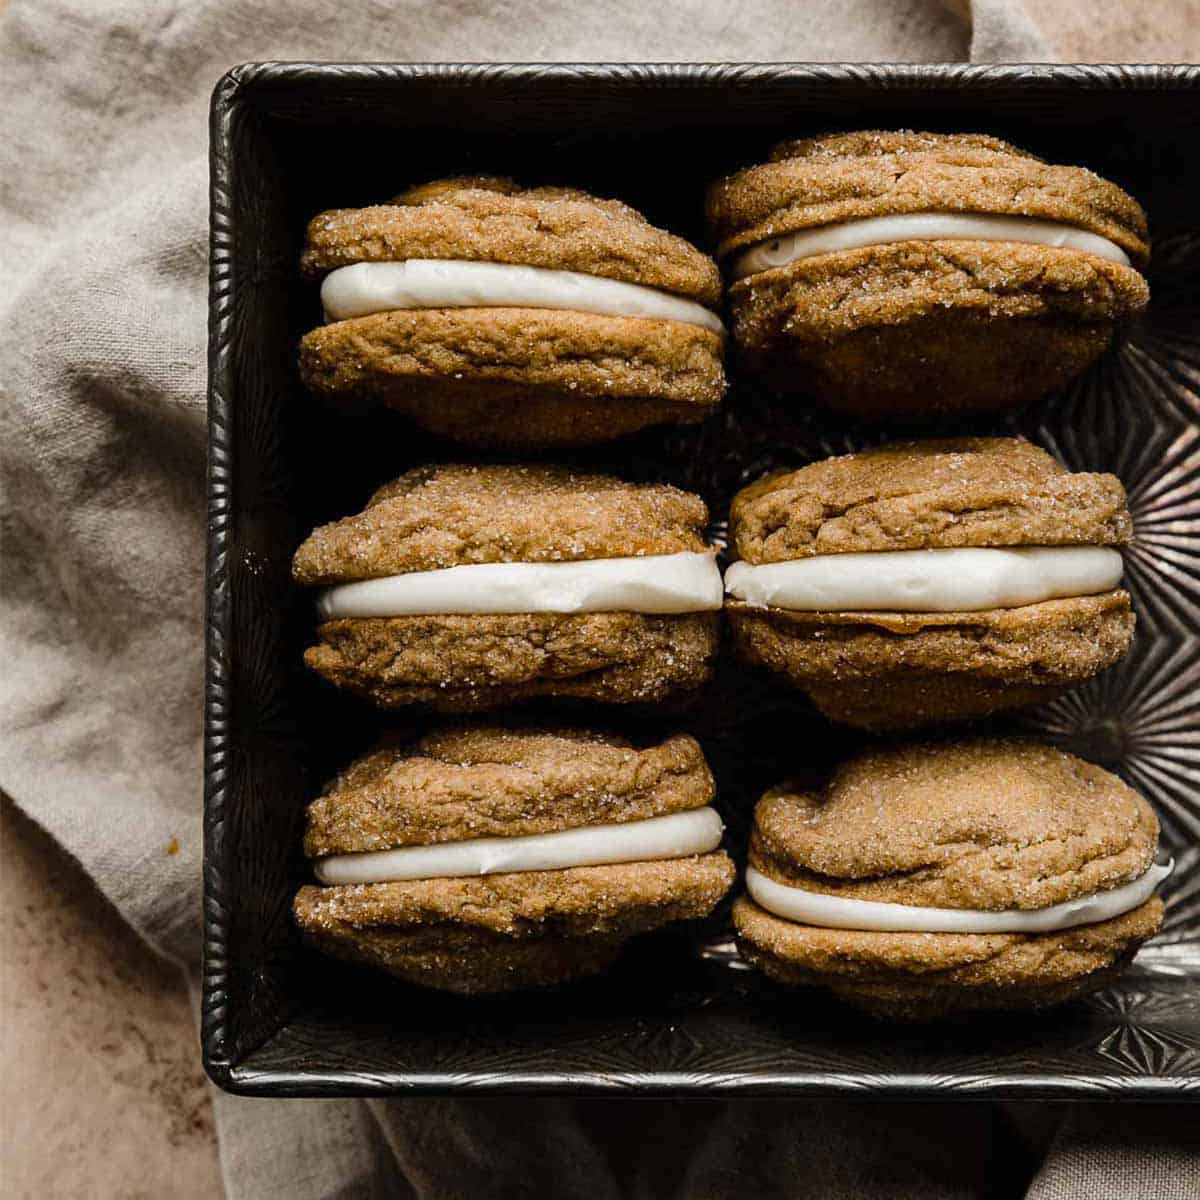 Six gingerbread sandwich cookies (or gingerbread whoopie pies) with a cream cheese filling, stacked on top of each other in a baking dish.